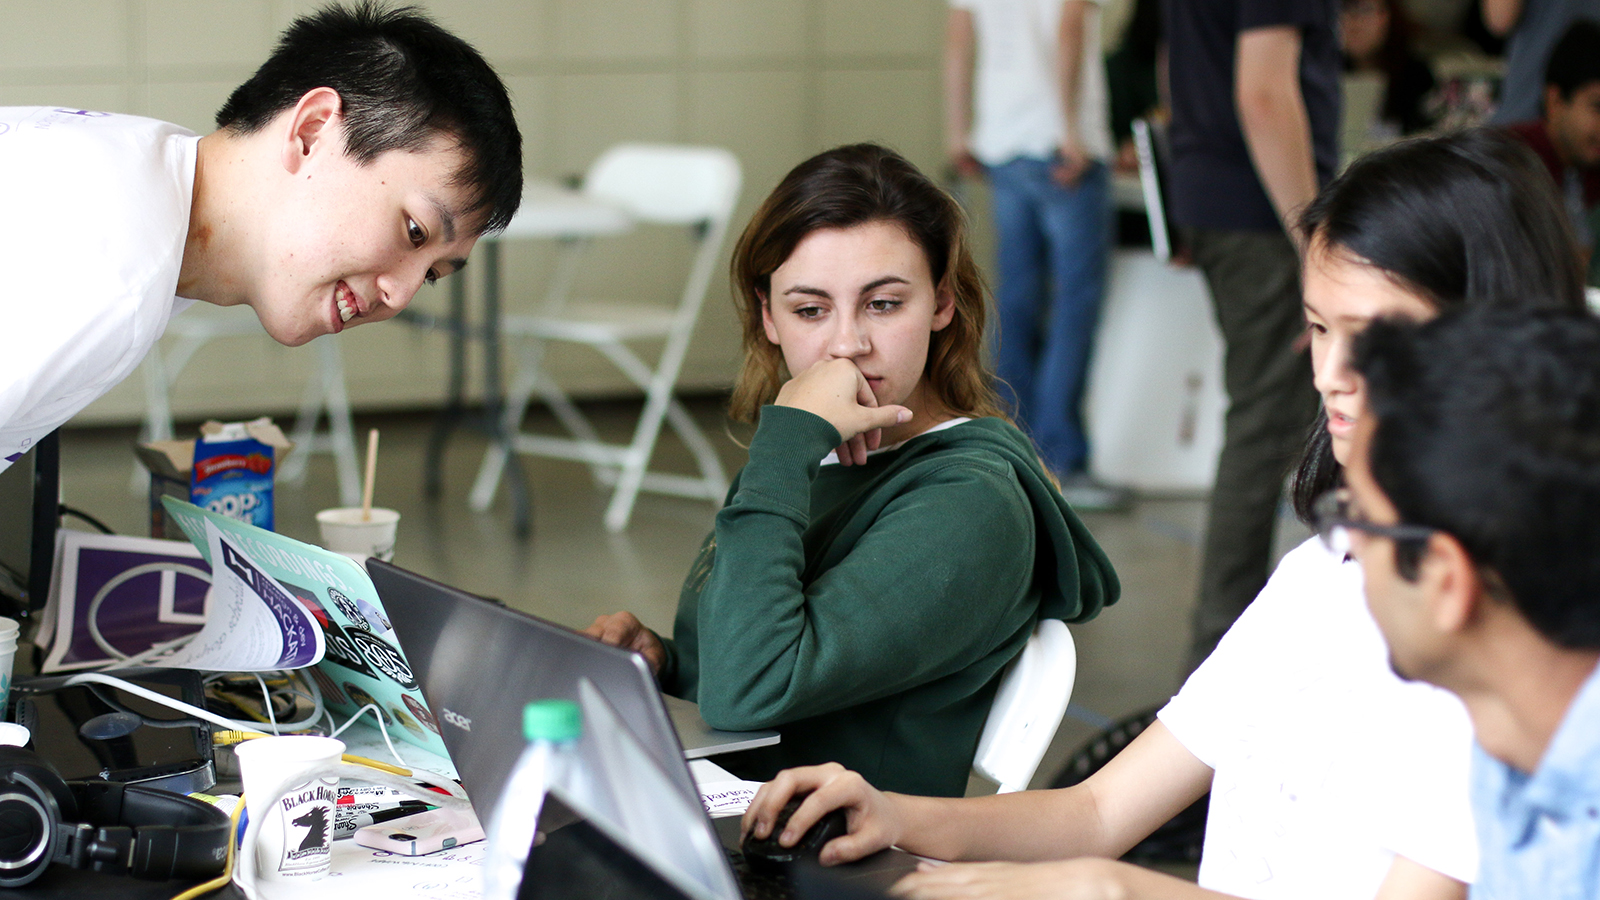 Group of students work together at a hackathon event.